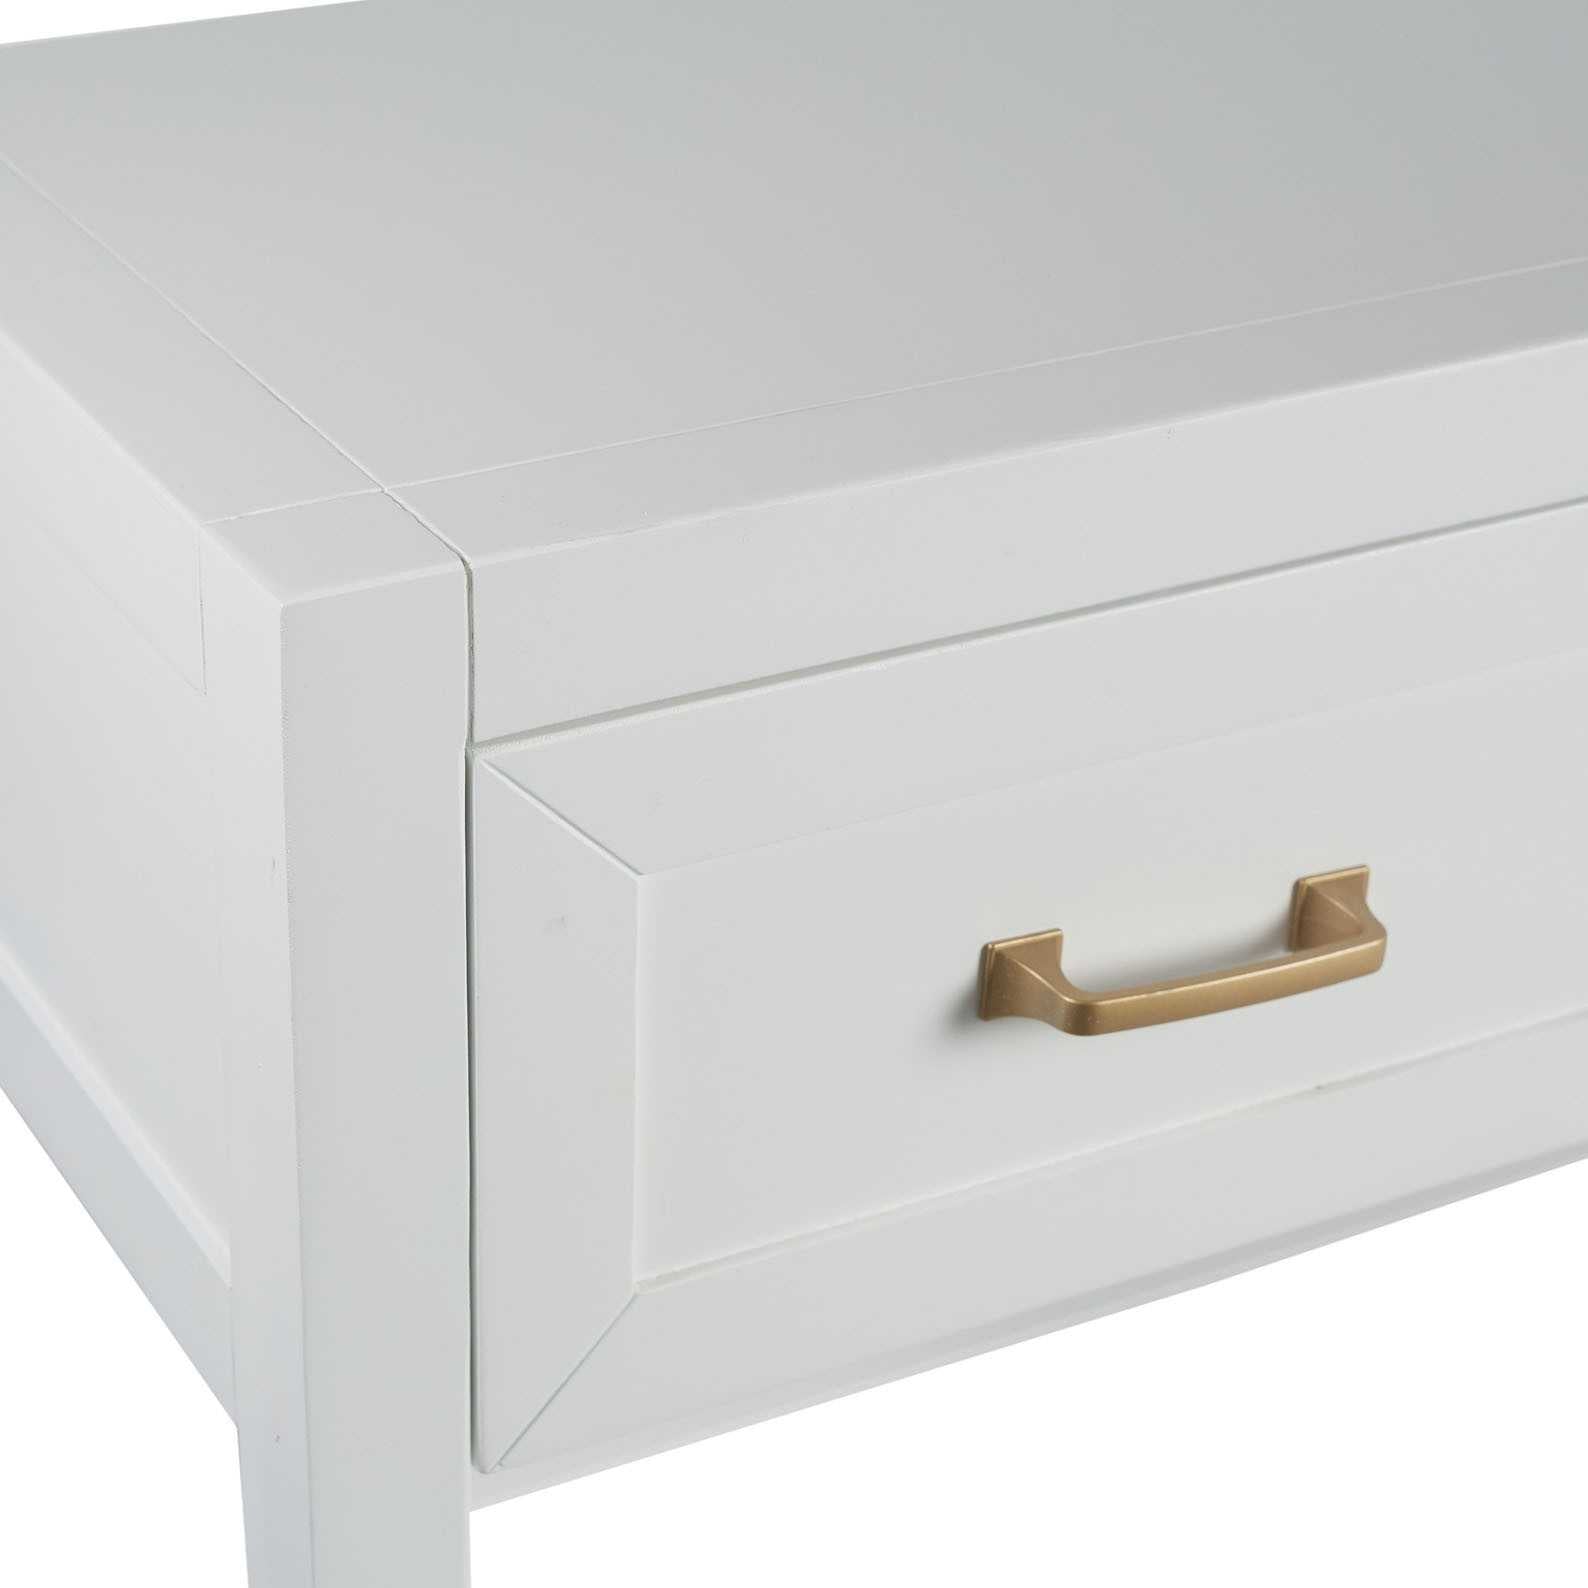 SH Griffin 3 Drawer Desk White with Gold handle